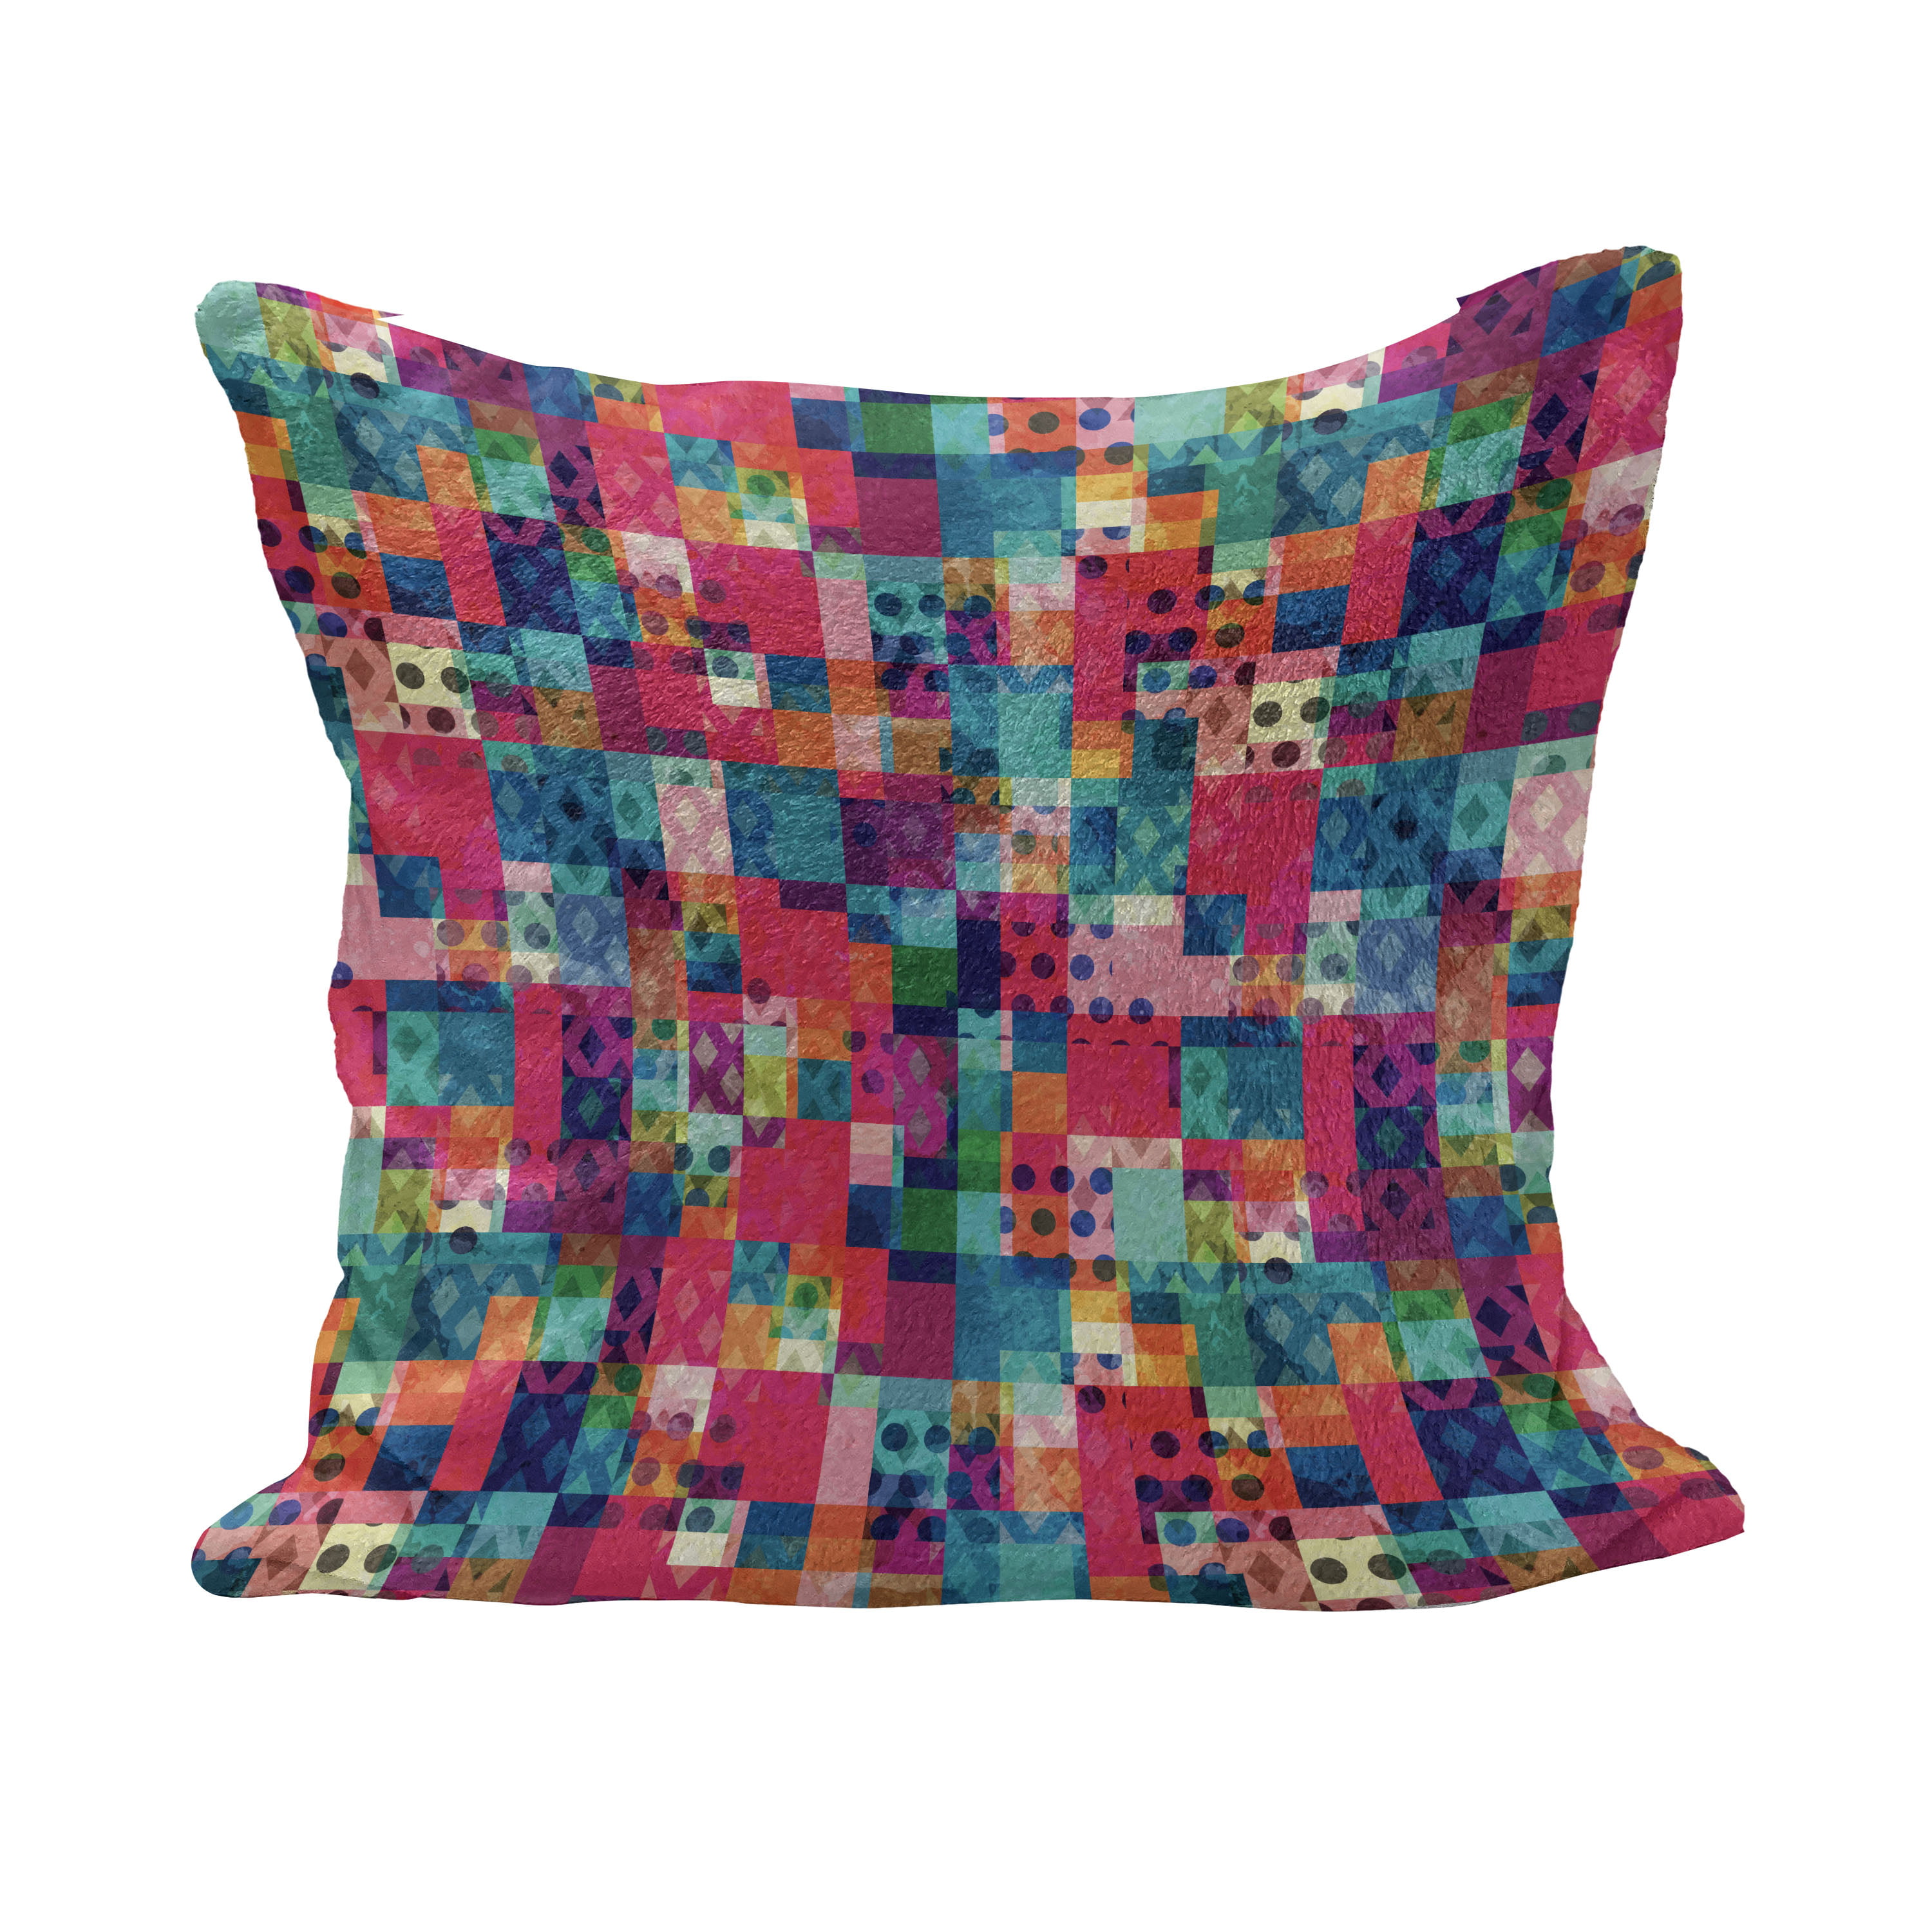 My Current Financial Situation Game Card Circle Triangle Square Throw Pillow Multicolor 16x16